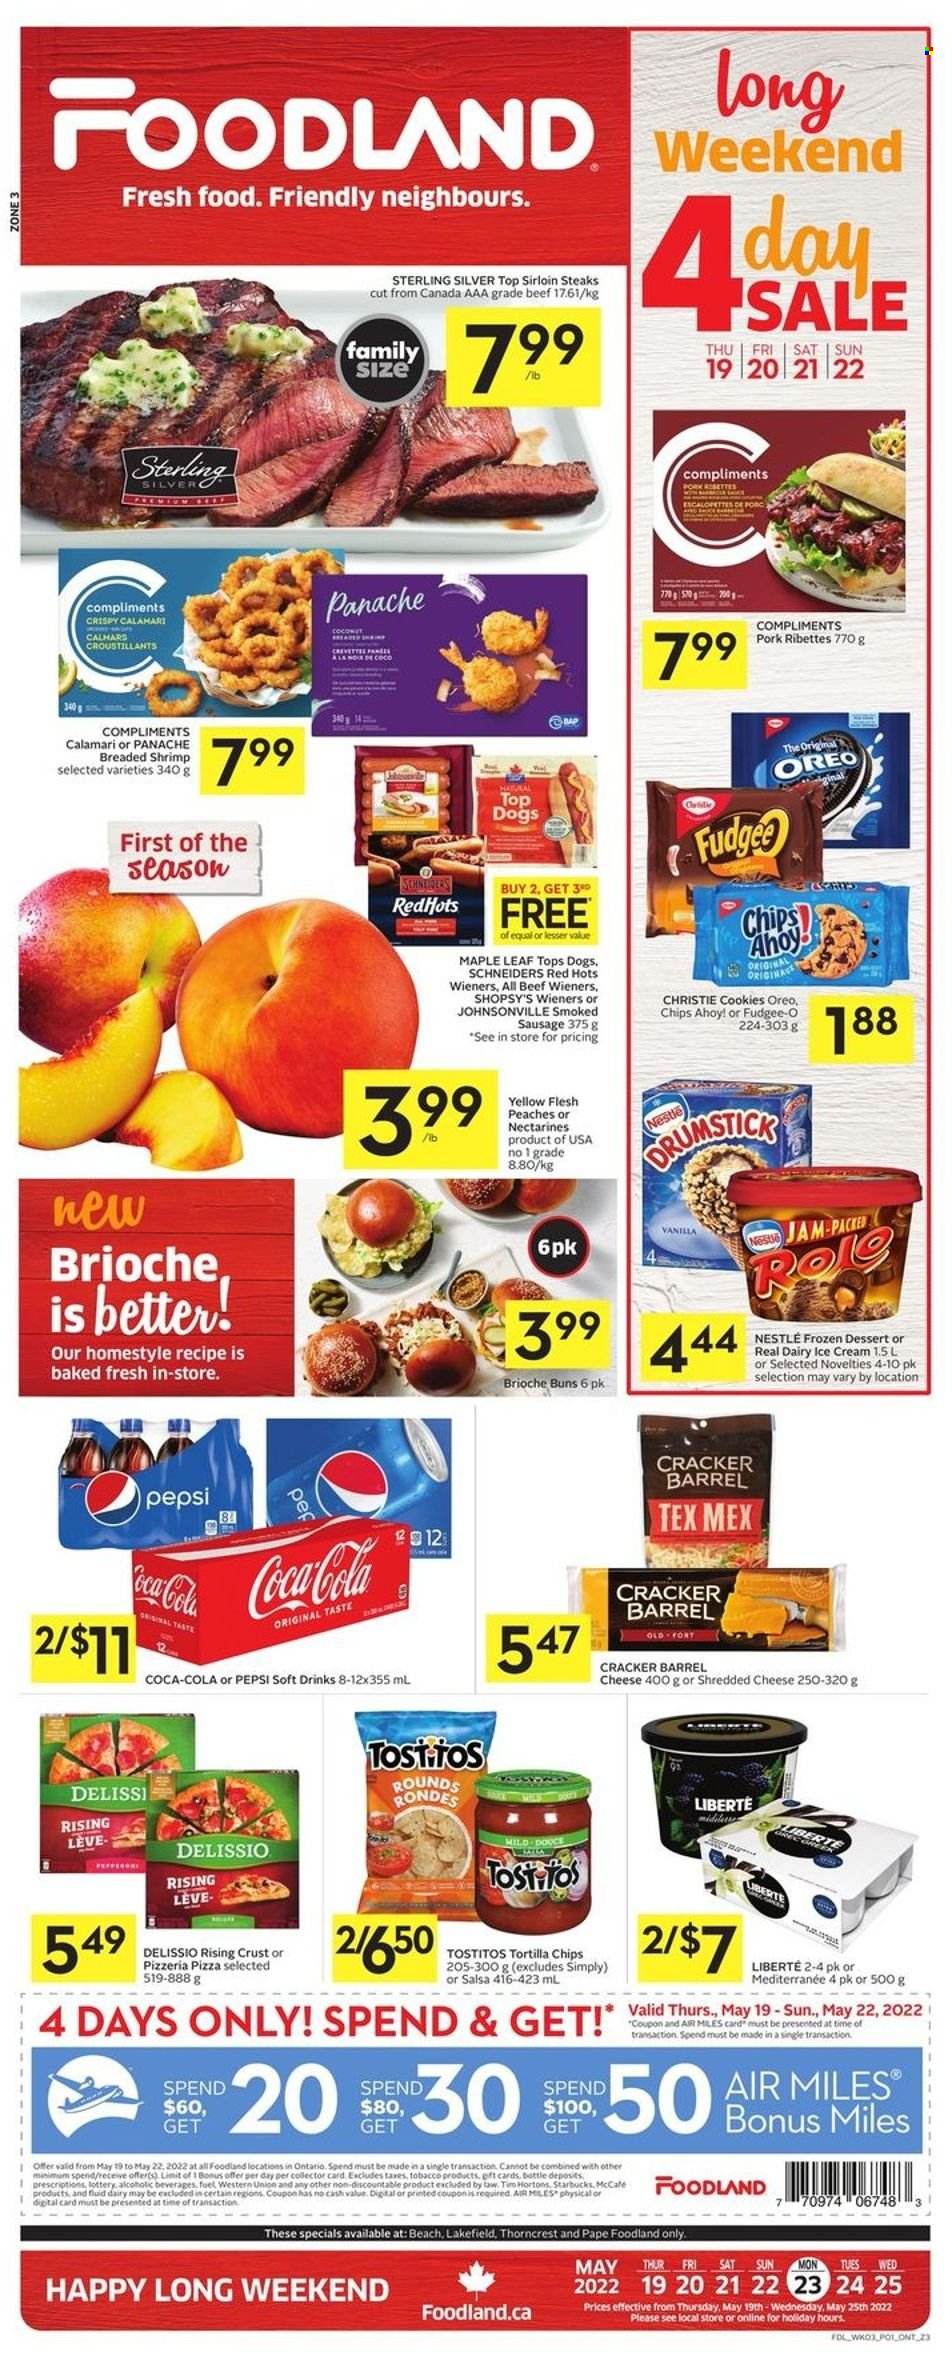 thumbnail - Foodland Flyer - May 19, 2022 - May 25, 2022 - Sales products - buns, brioche, nectarines, peaches, calamari, shrimps, pizza, Johnsonville, sausage, smoked sausage, shredded cheese, ice cream, cookies, fudge, crackers, Chips Ahoy!, tortilla chips, Tostitos, salsa, fruit jam, Coca-Cola, Pepsi, soft drink, Starbucks, McCafe, sirloin steak, Nestlé, Oreo, steak. Page 1.